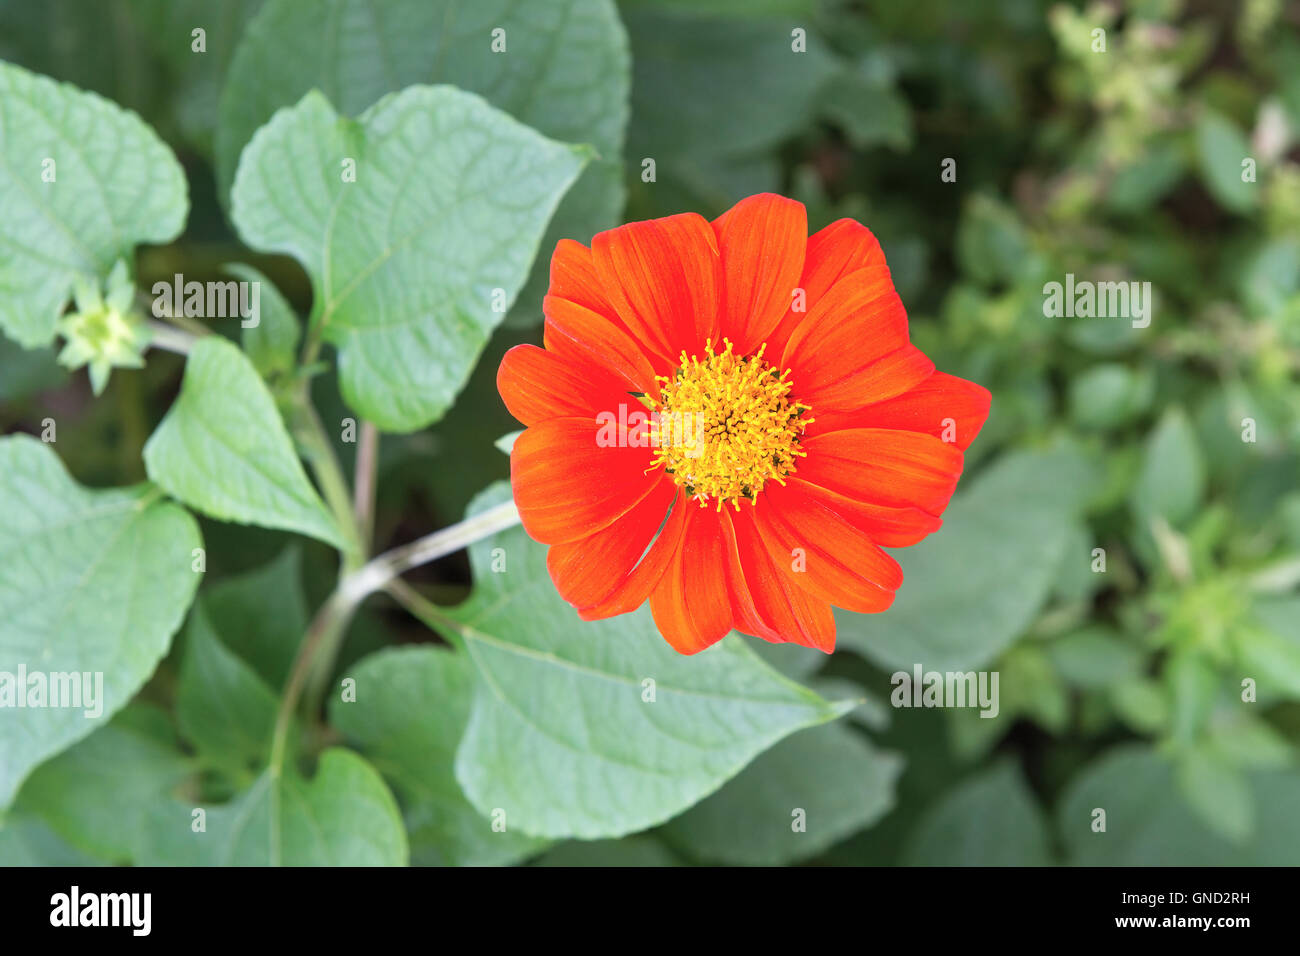 Colourful yellow red flower in nature Stock Photo